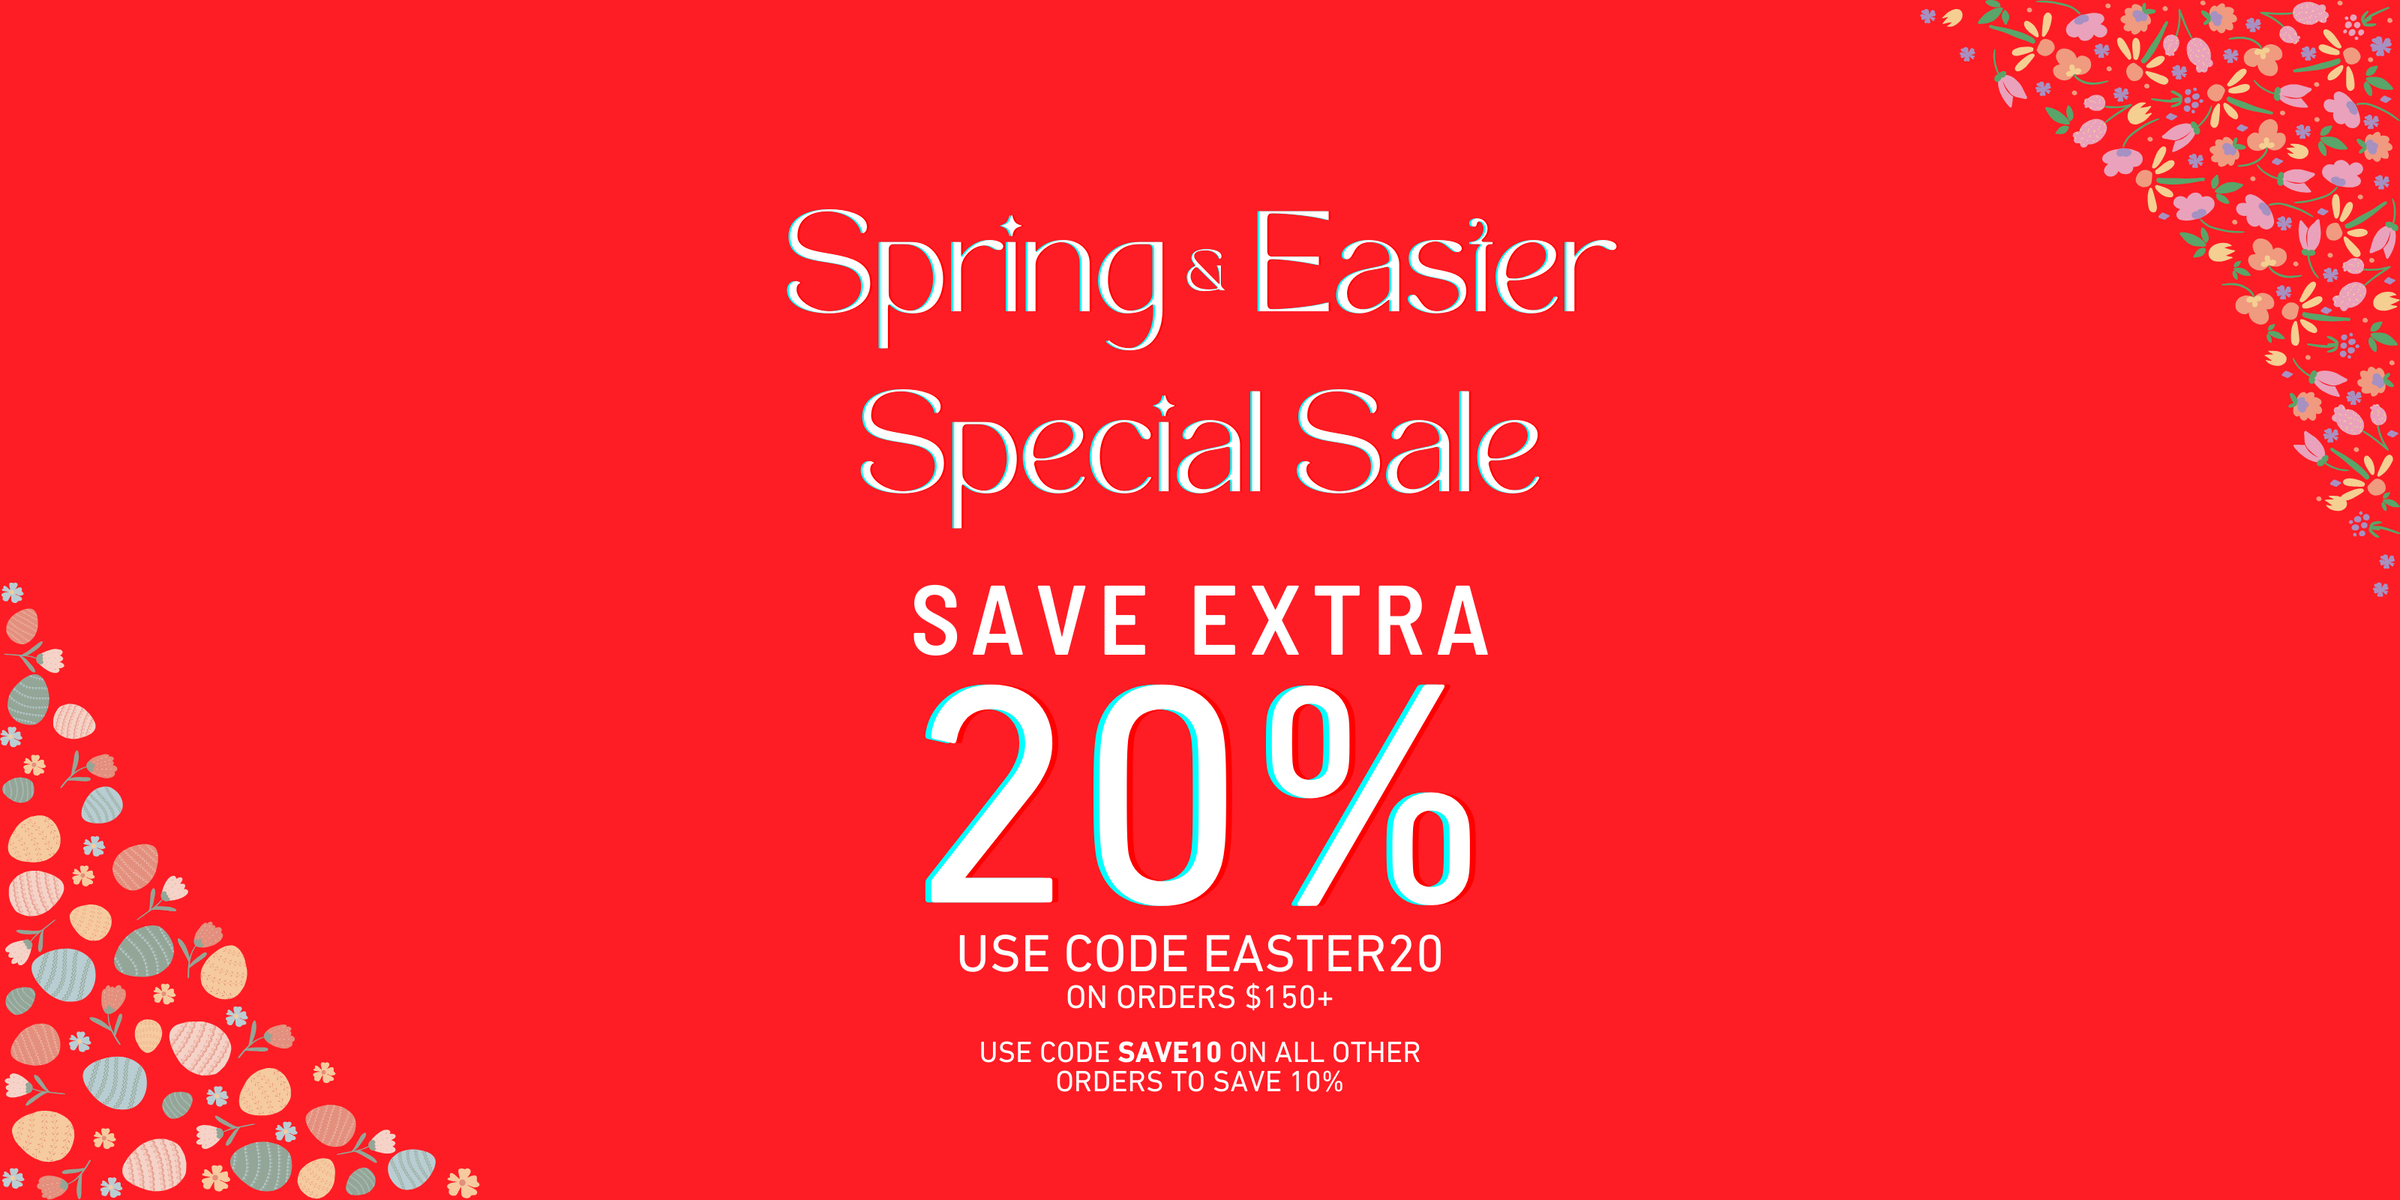 Spring & Easter Special, Save Extra 20% Off Use Code EASTER20 On Orders Over $150, or Use Code Save10 On All Other Orders To Save 10%